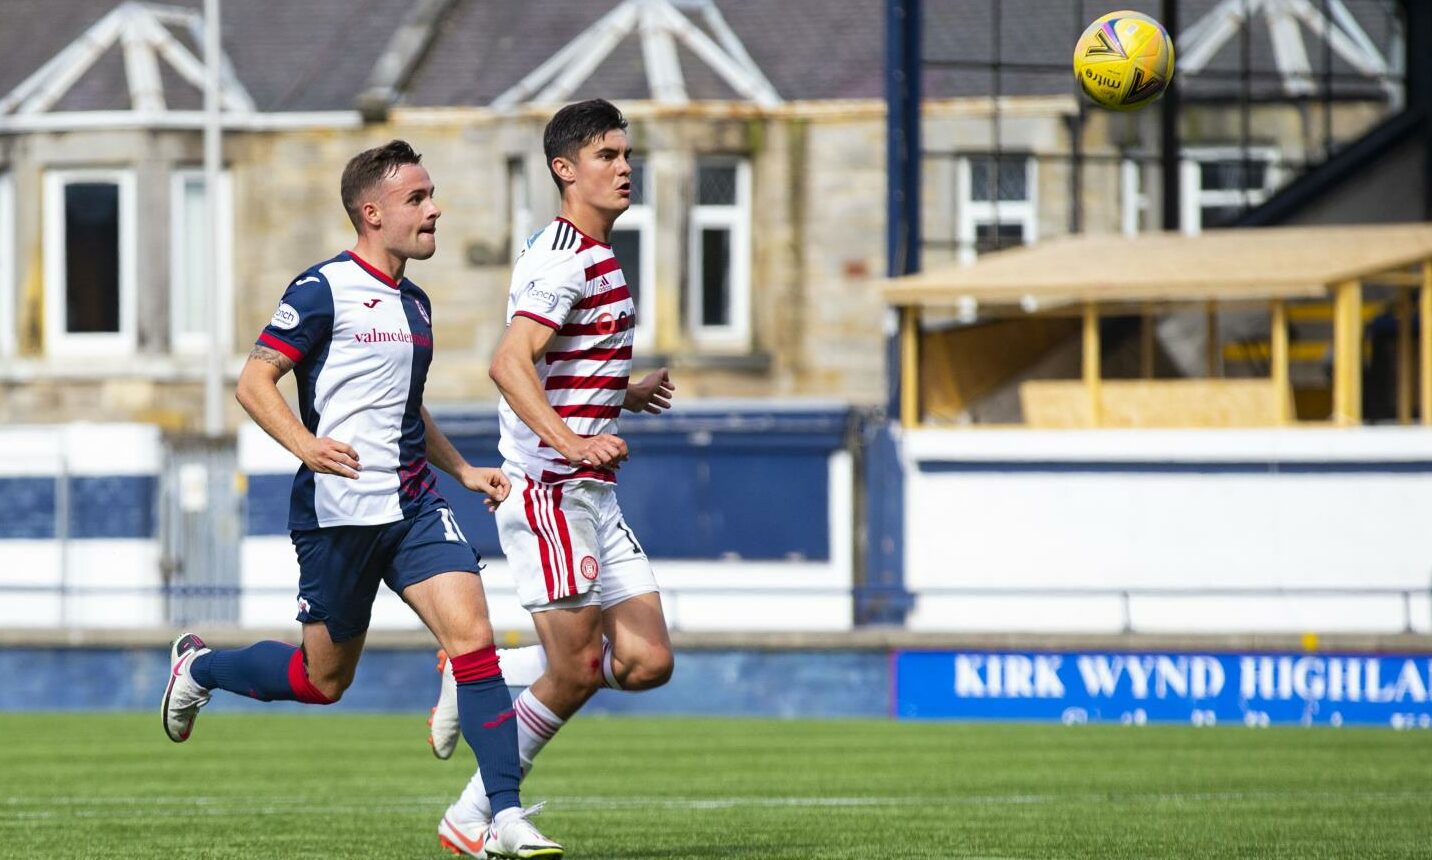 Lewis Vaughan bagged a brace in his last start for Raith Rovers. Image: SNS